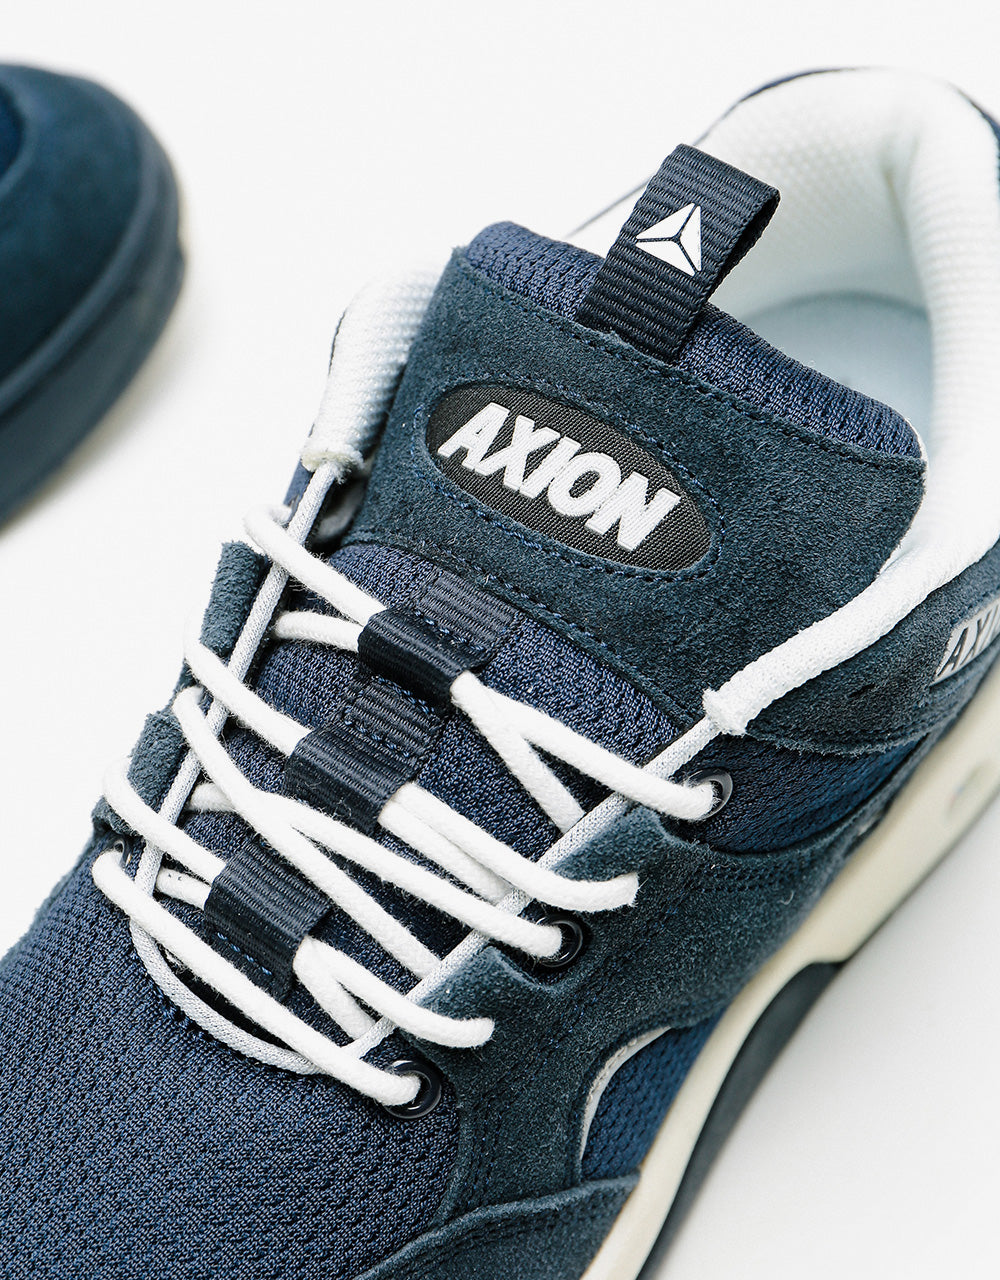 Axion Genesis Skate Shoes - Navy/Silver/White